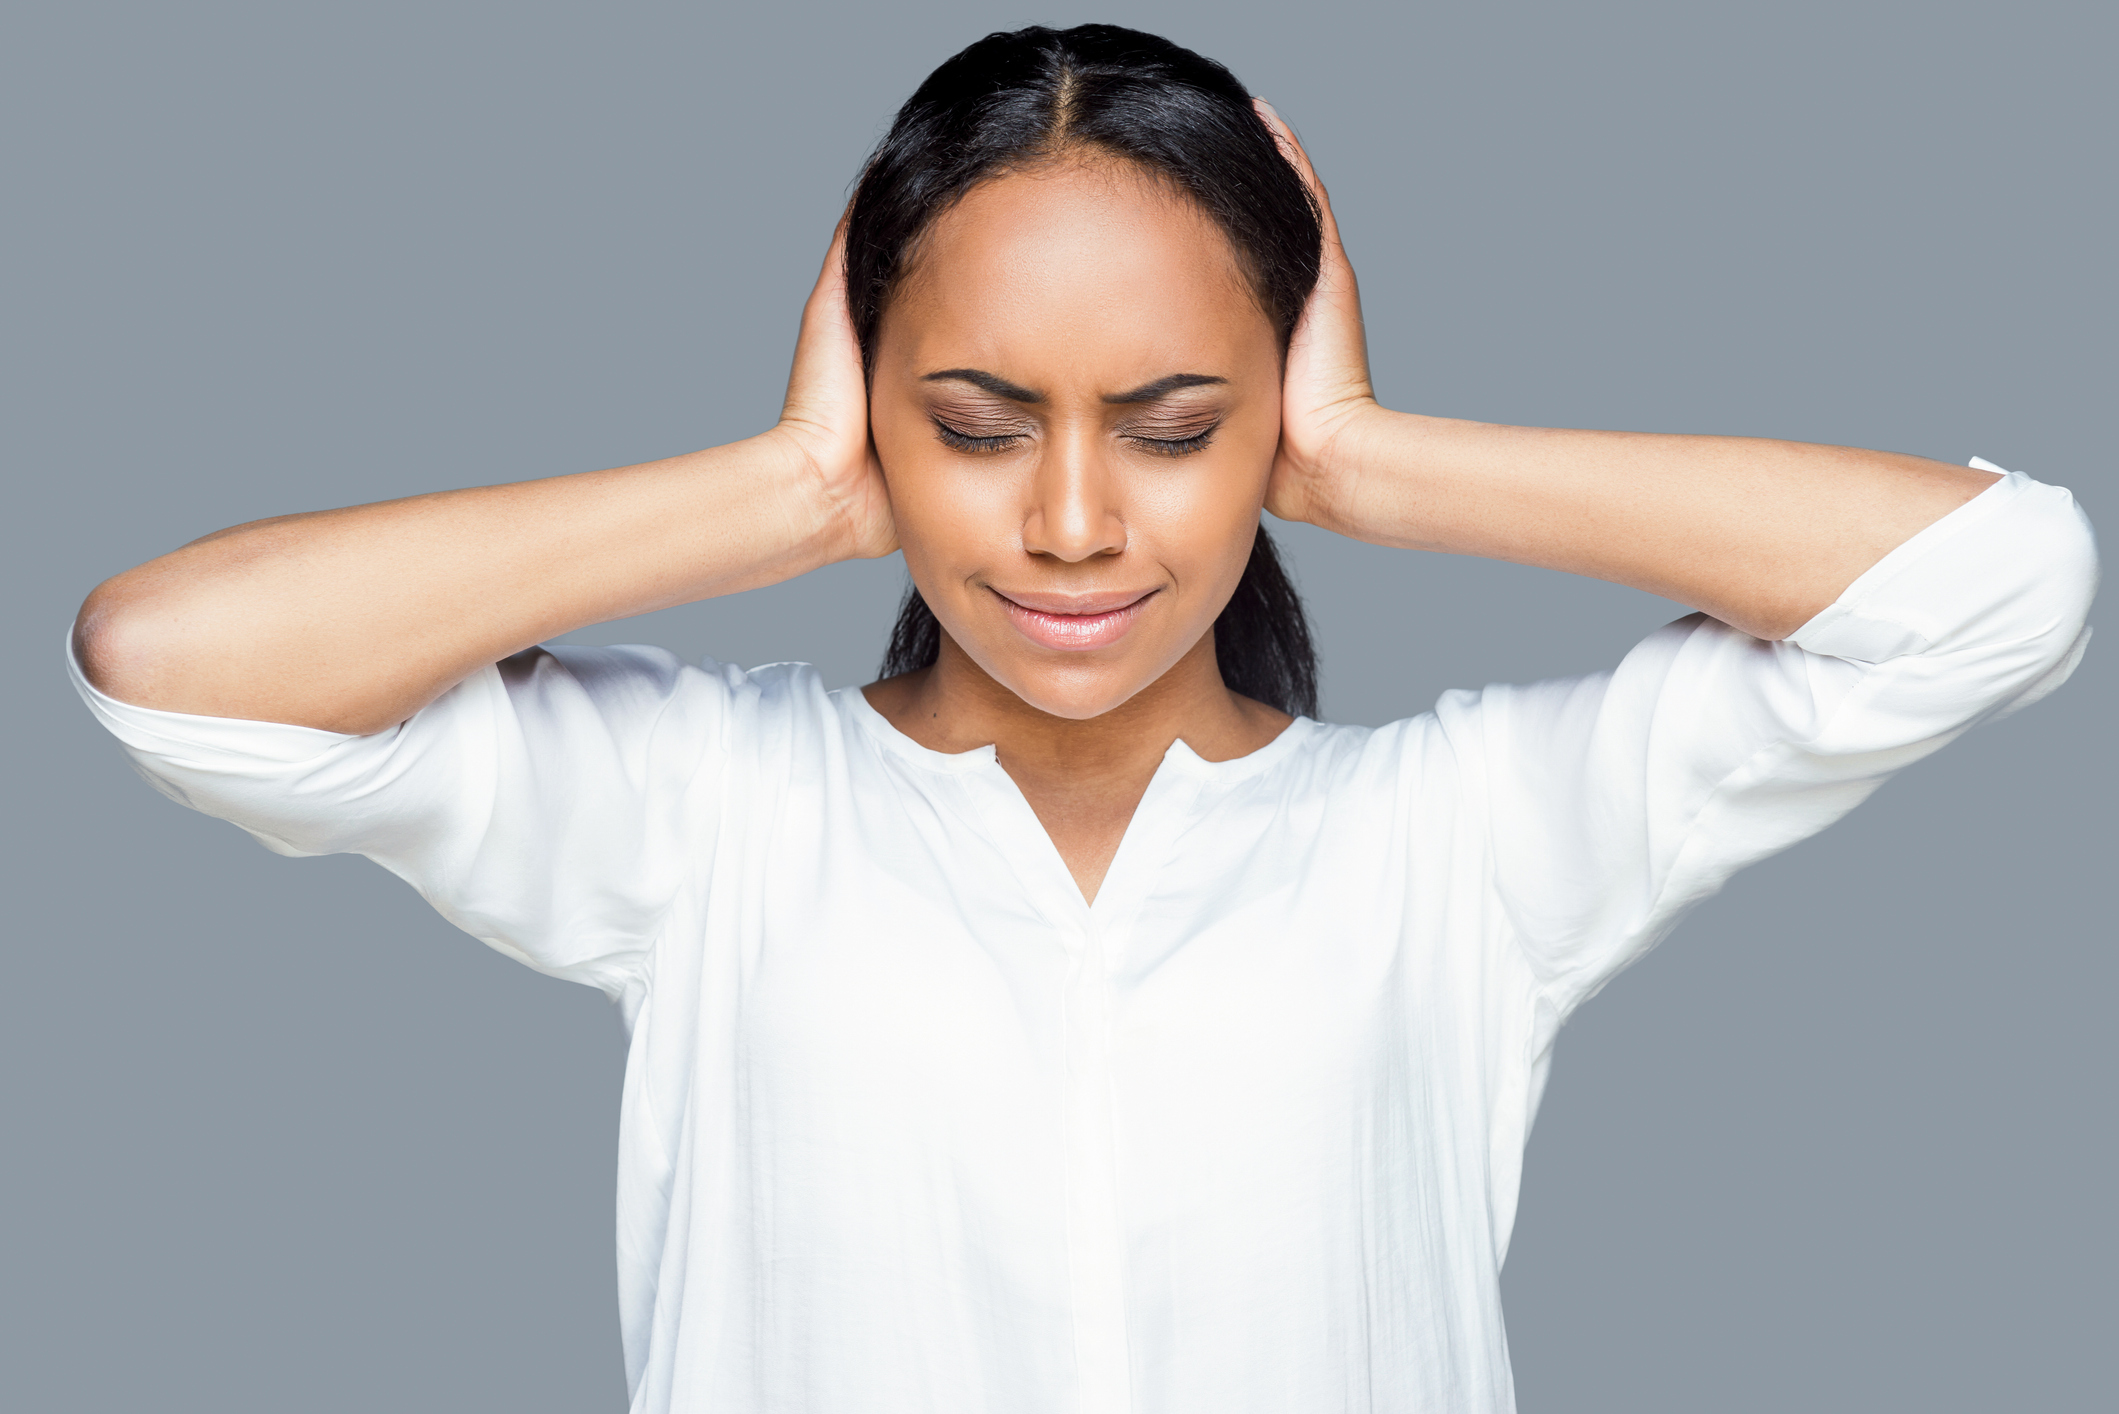 Can you really tame tinnitus in just 12 weeks?